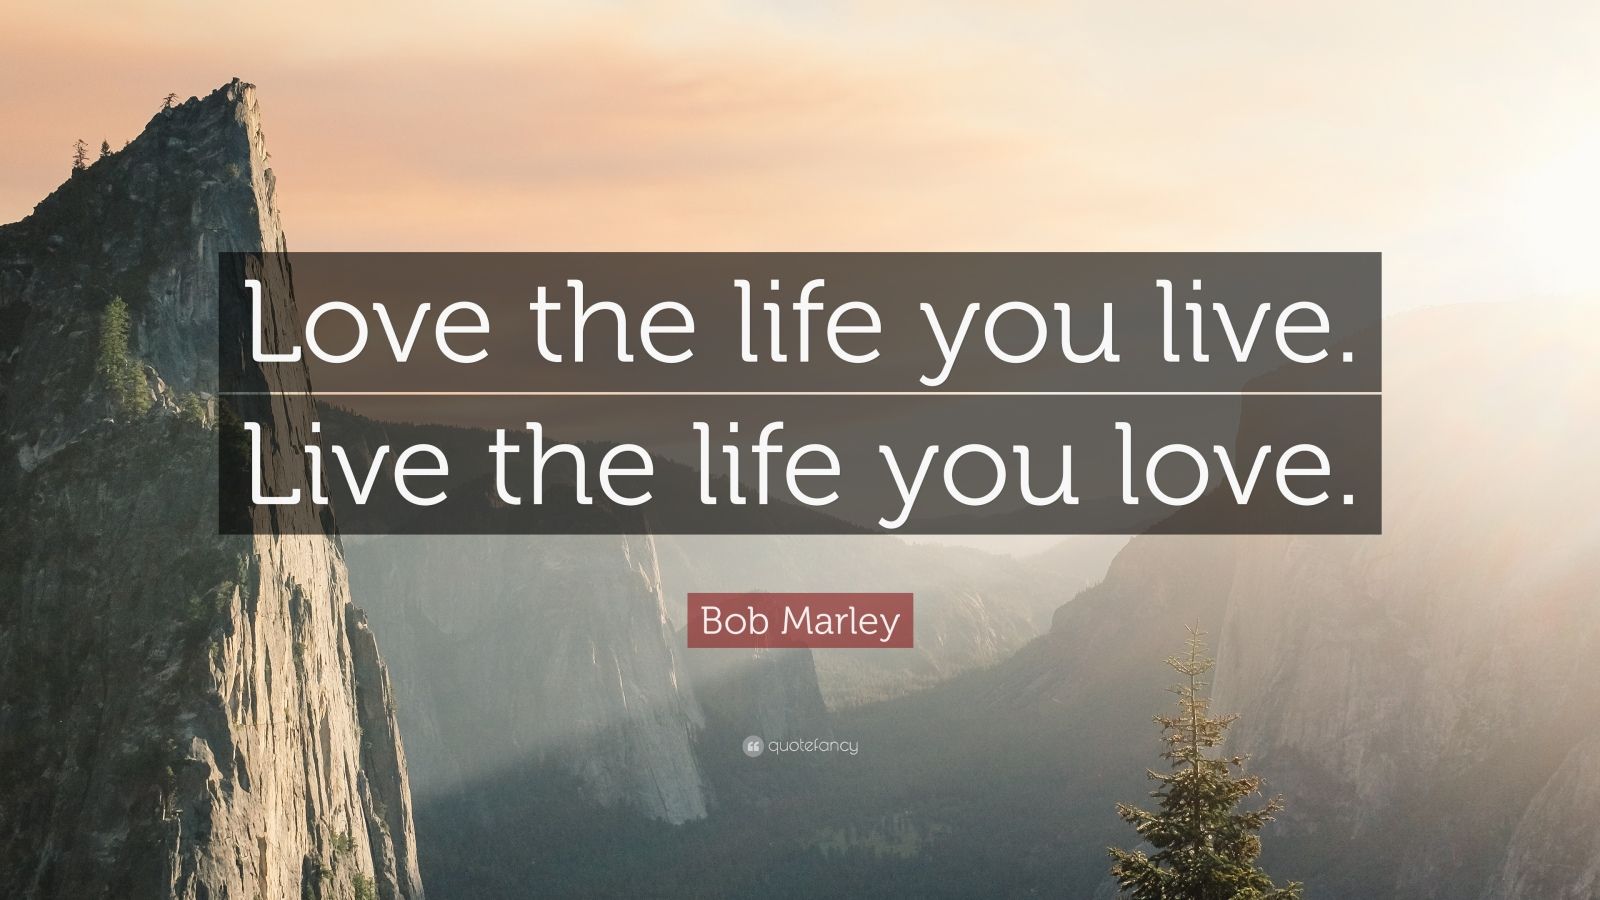 Bob Marley Quote: “Love the life you live. Live the life you love.” (15 wallpapers ...1600 x 900